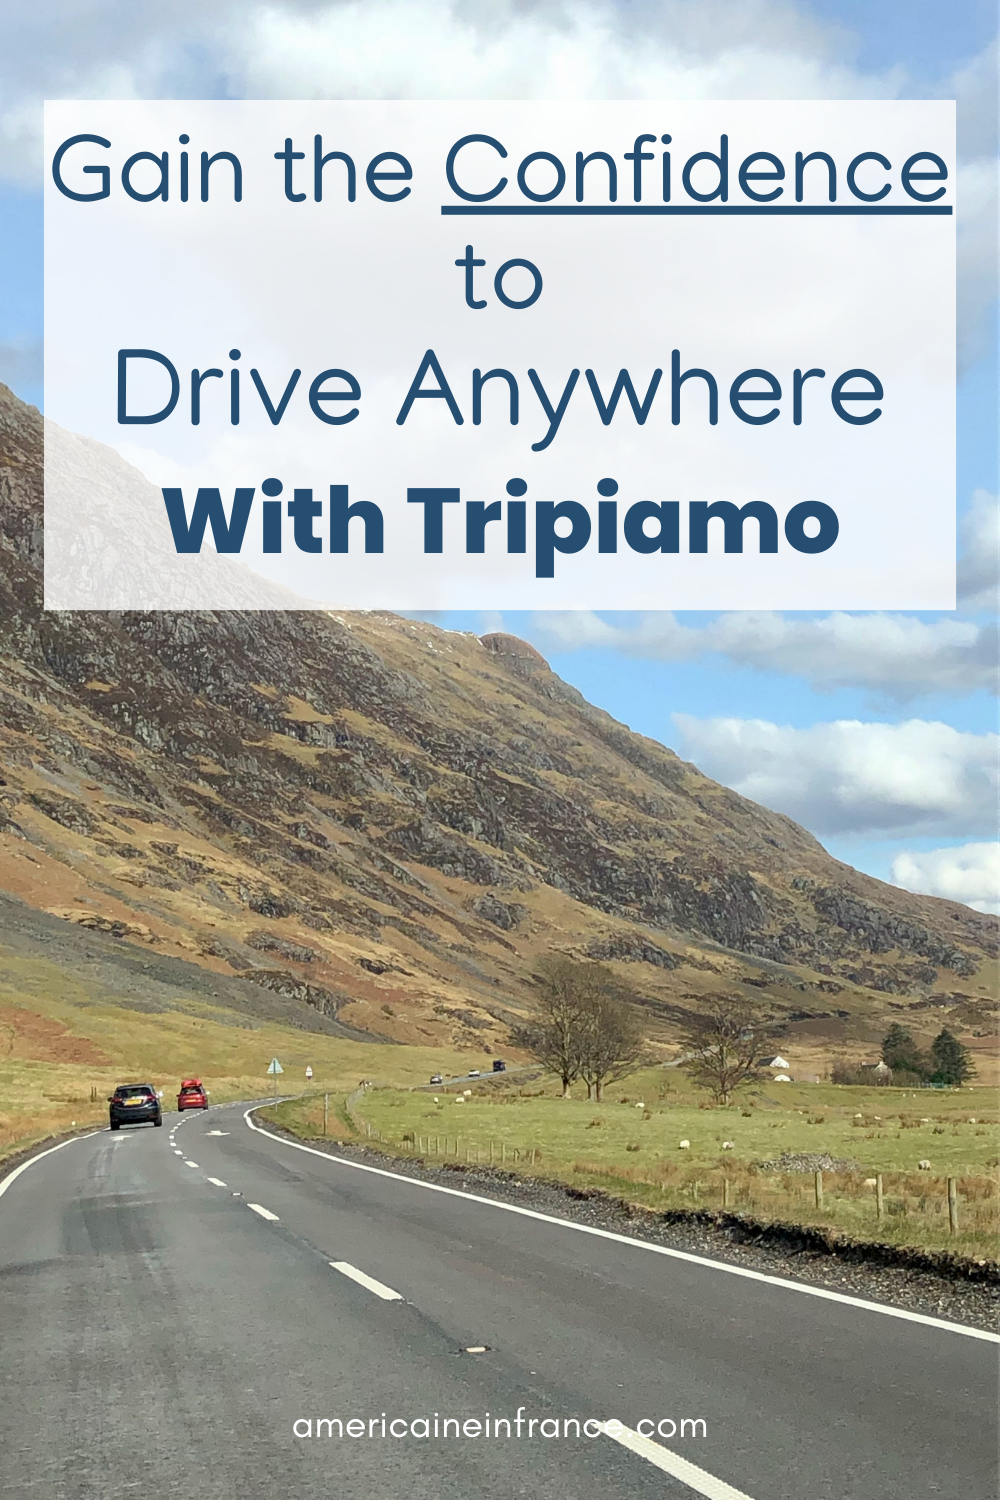 Gain the Confidence to Drive Anywhere With Tripiamo